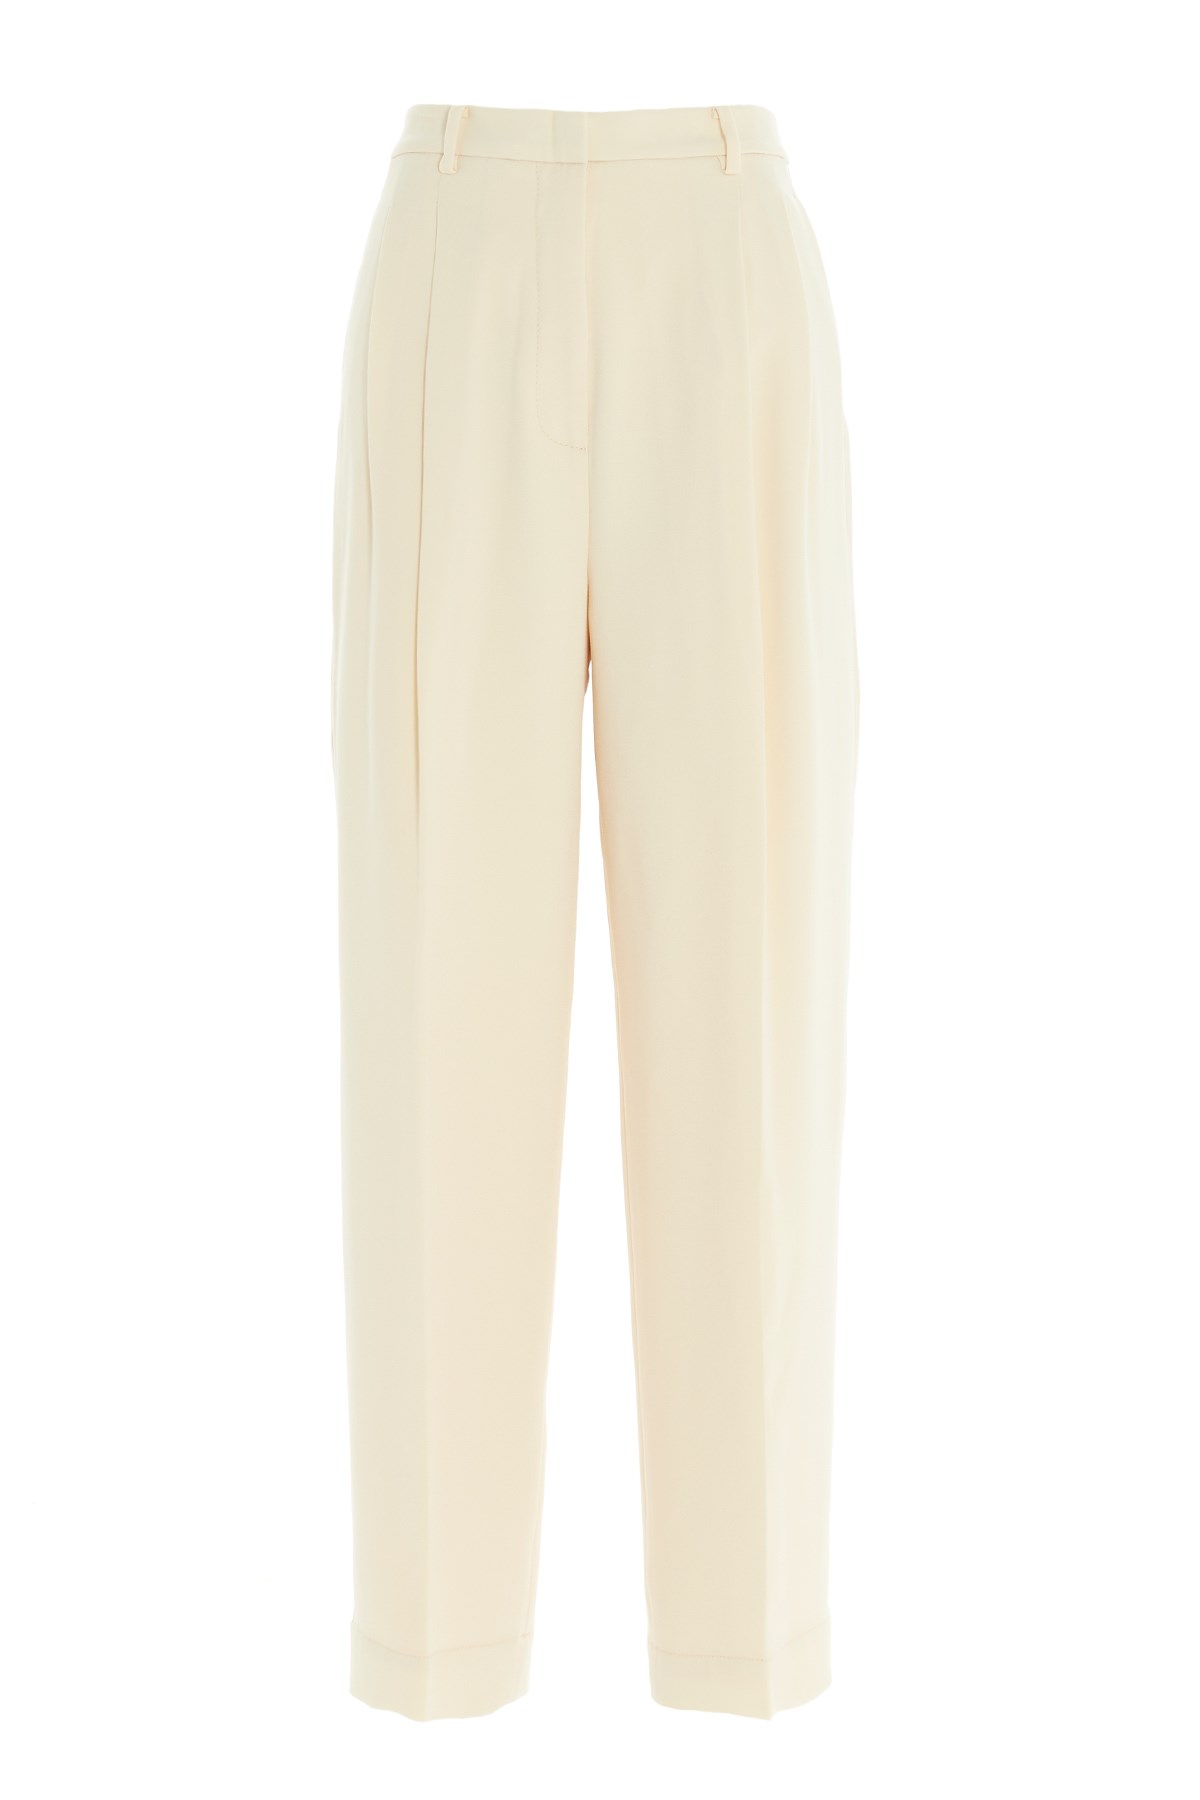 TORY BURCH Central Fold Crepe Pants